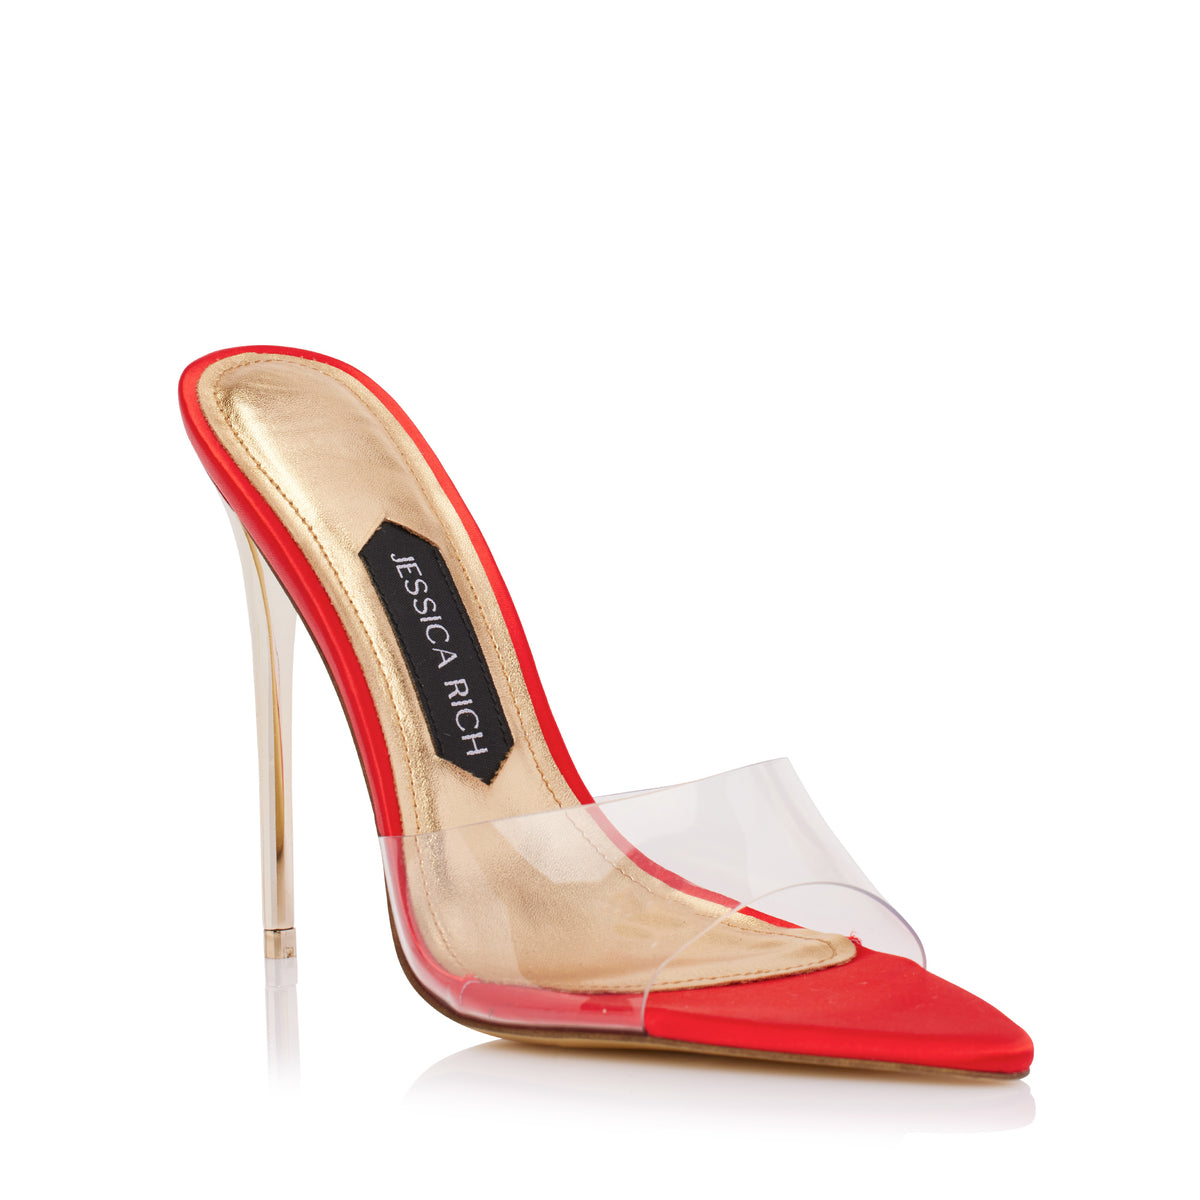 RACY MULE 120MM | SATIN RED